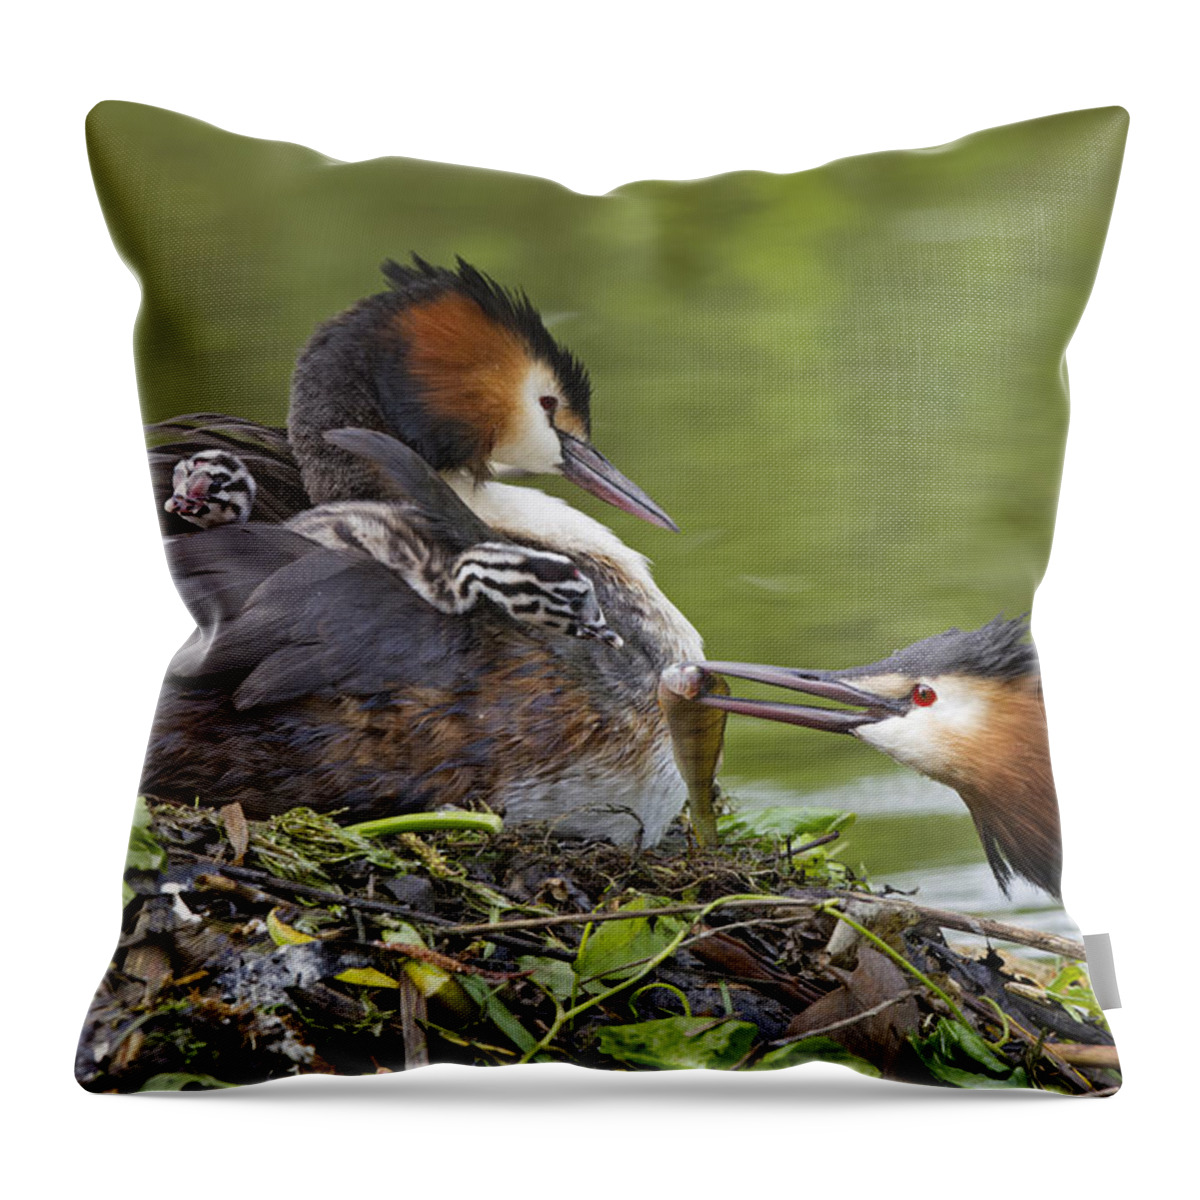 Flpa Throw Pillow featuring the photograph Great Crested Grebes Feeding Chick #3 by Dickie Duckett